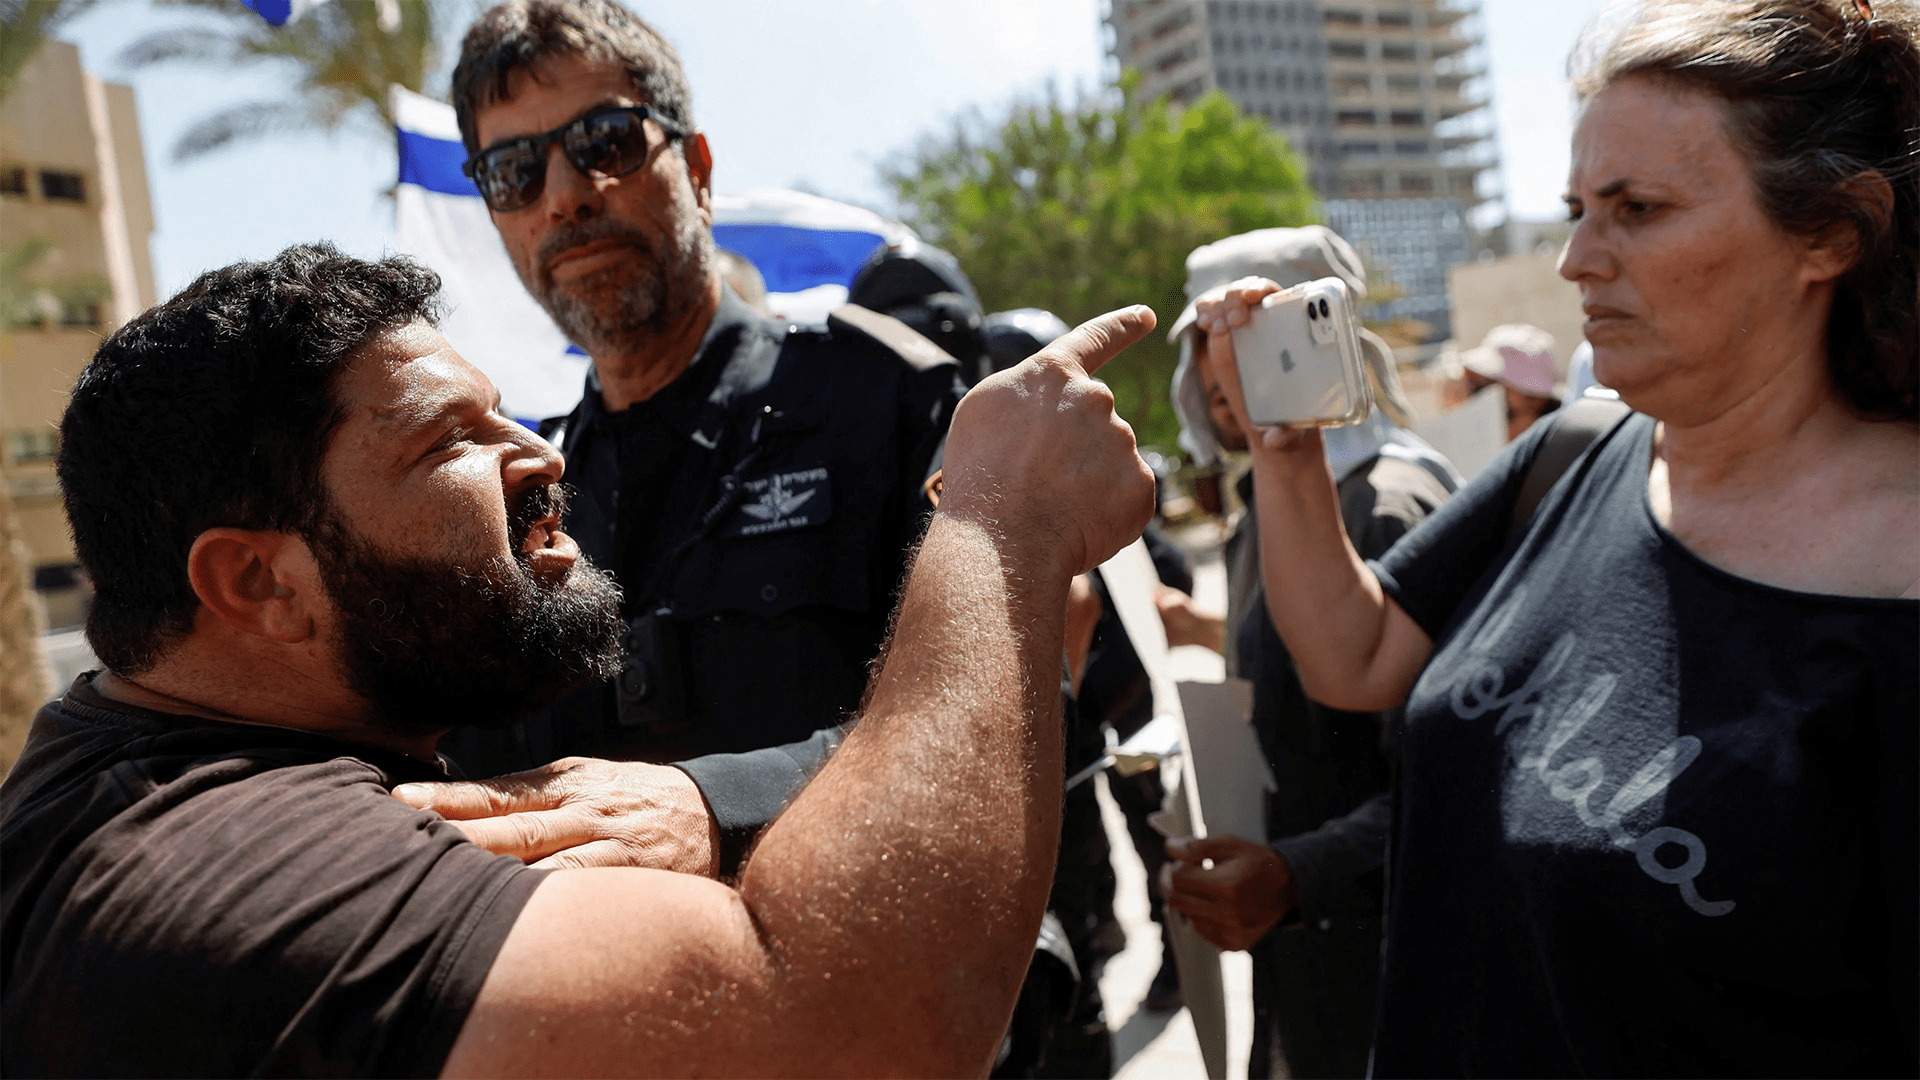 Far-right politici Almog Cohen argues with a protester supporting Palestinian Mohammad El Halabi during a demonstration outside an Israeli court in Beer Sheba, on 15 Israel, June, 2022. (Reuters)